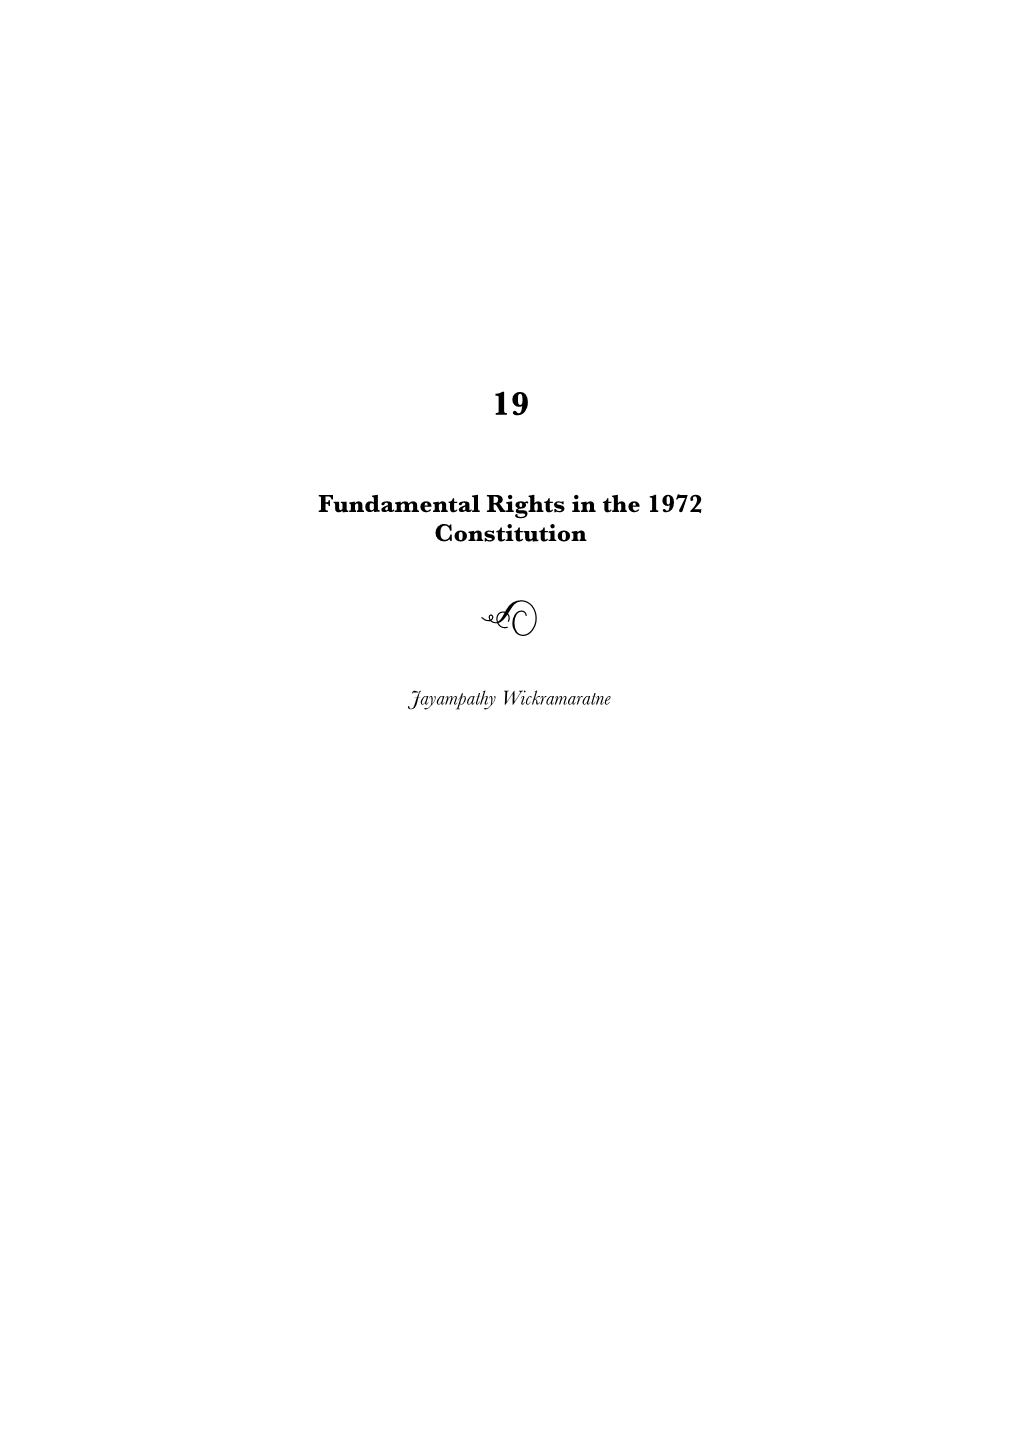 Fundamental Rights and the 1972 Constitution